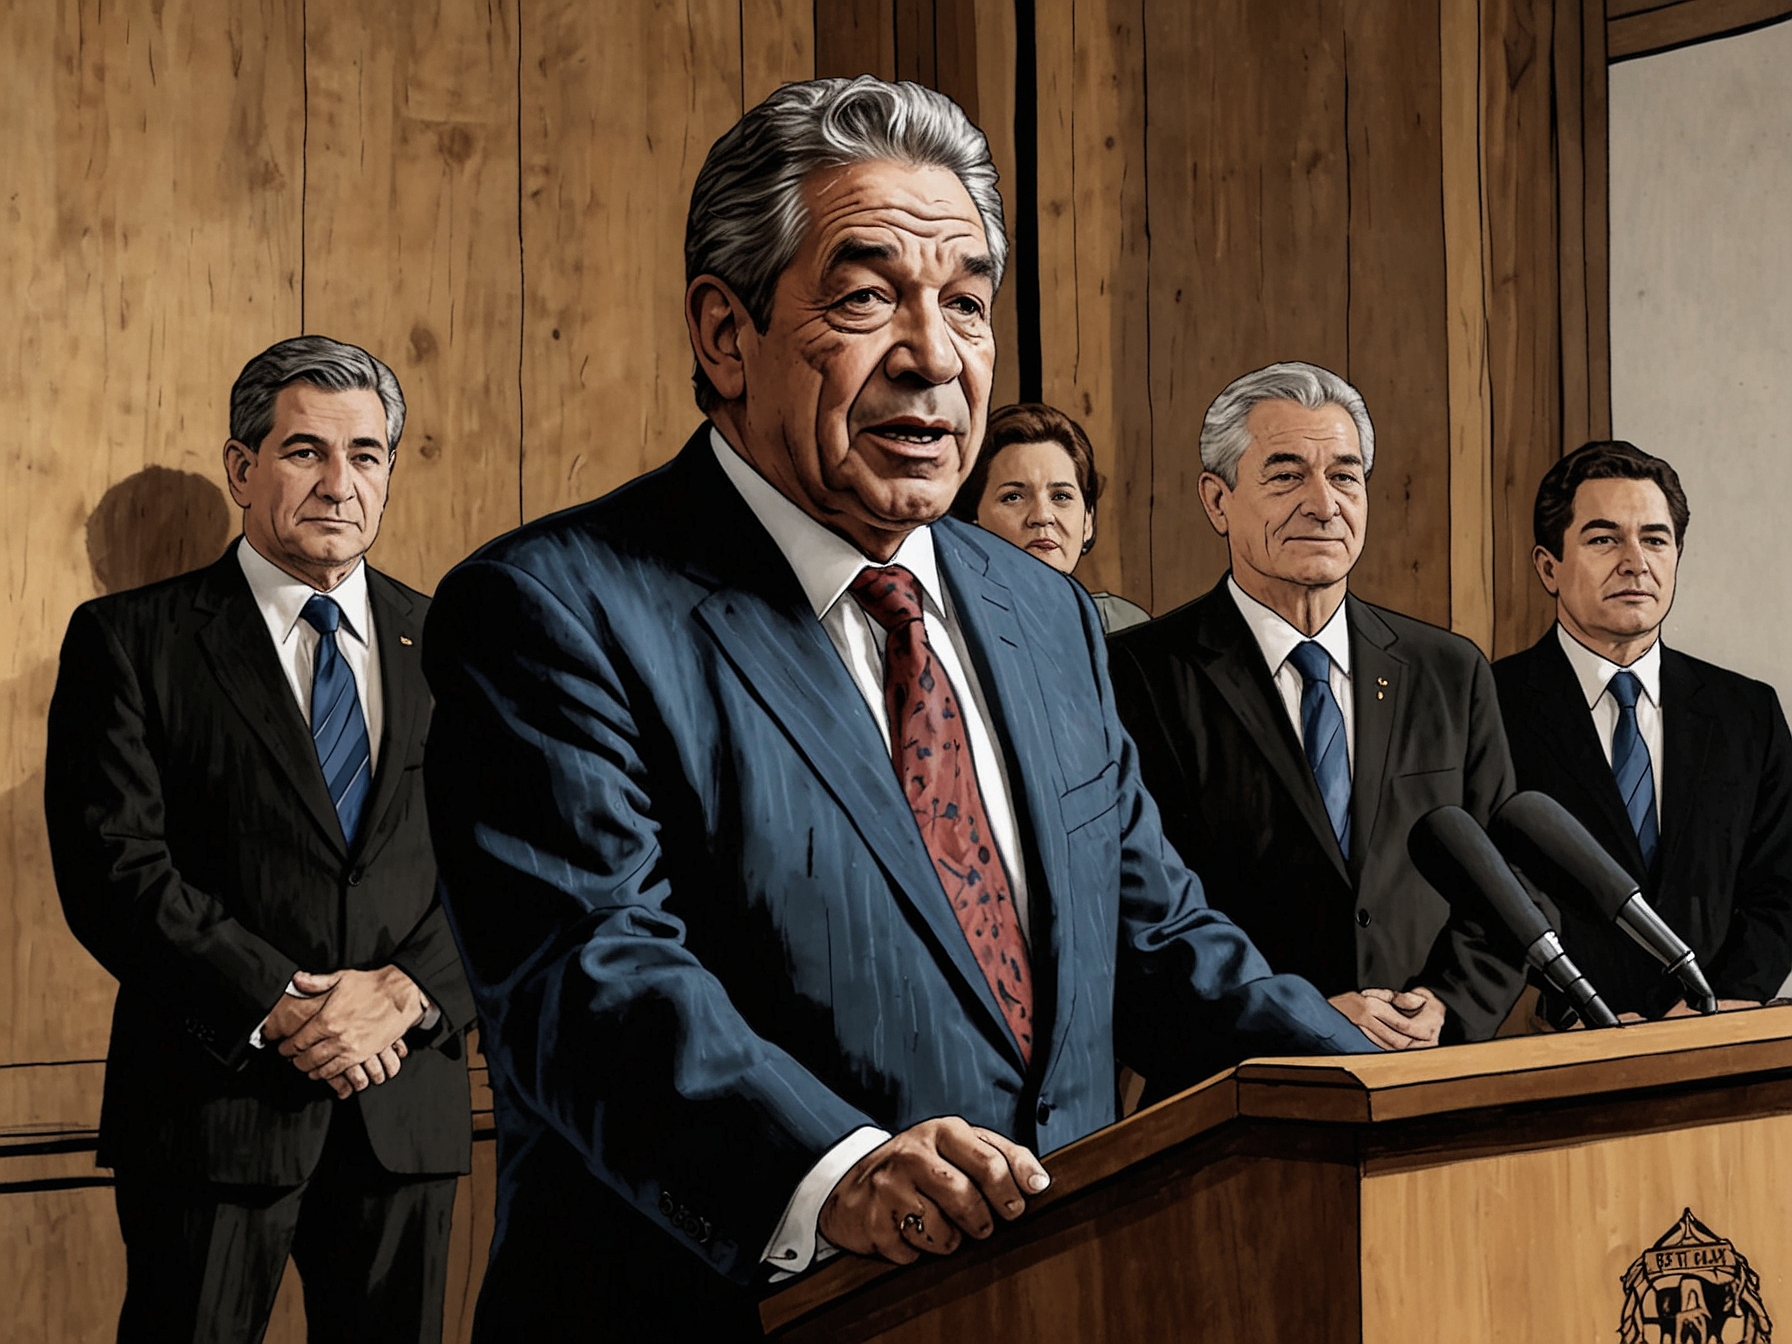 Winston Peters stands confidently behind a podium, addressing the media at the post-Cabinet press conference. His composed demeanor and articulate presentation underscore his leadership skills.